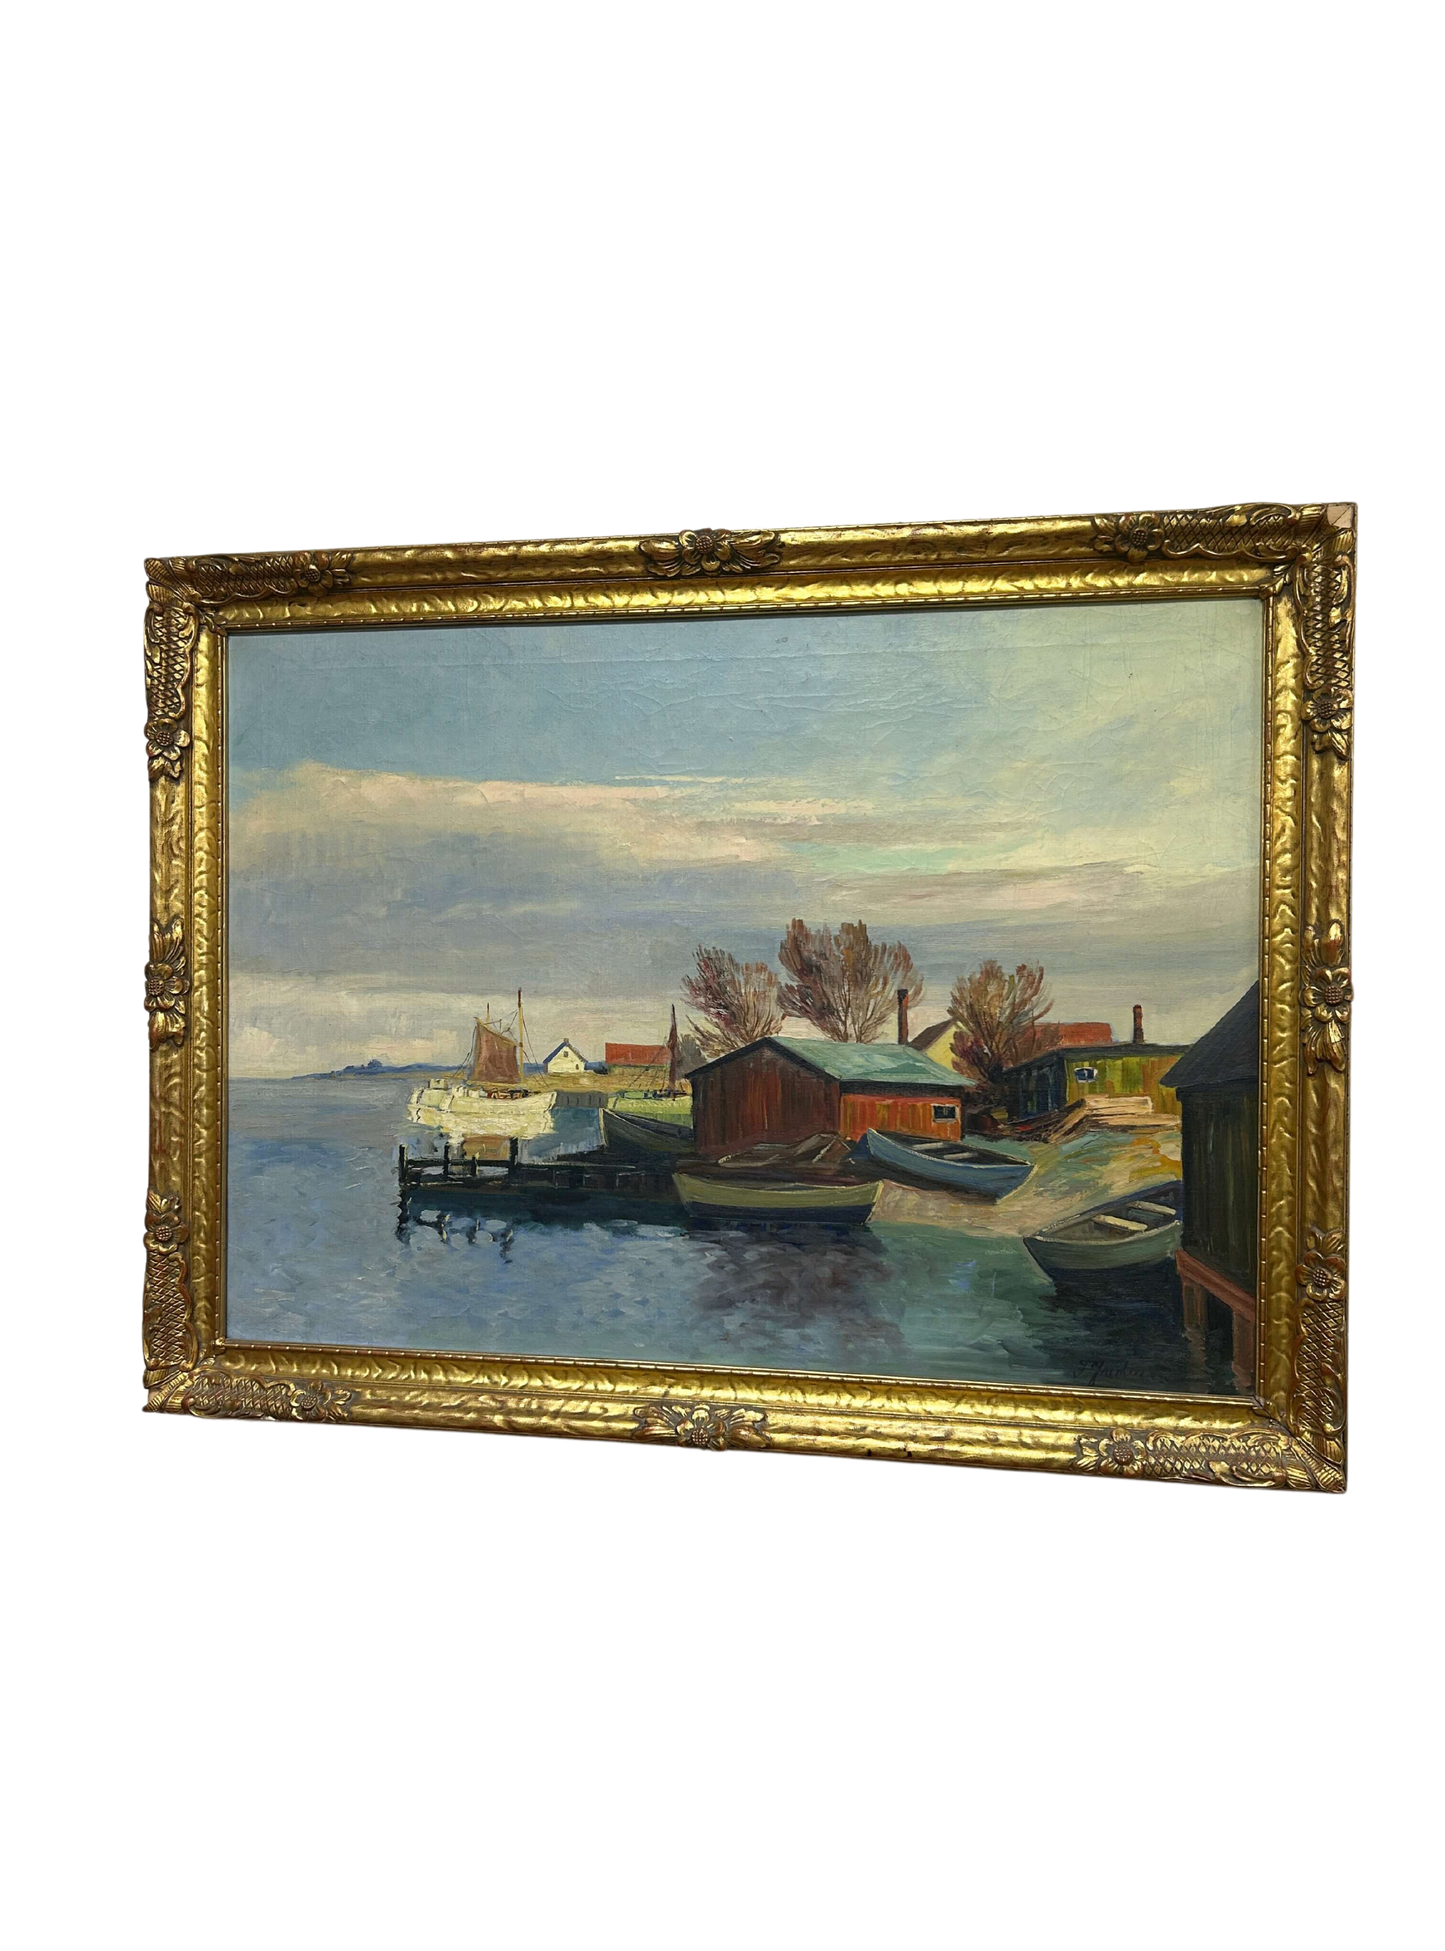 This extraordinary painting, elegantly framed, captures the tranquility of a serene boat and cottage scene in mesmerizing shades, available at the hearing clinic at Allard Audiology. The artist's masterful technique and attention to detail promise to captivate and inspire, making it a prized addition for collectors and decorators alike. Available at the hearing clinic at Allard Audiology